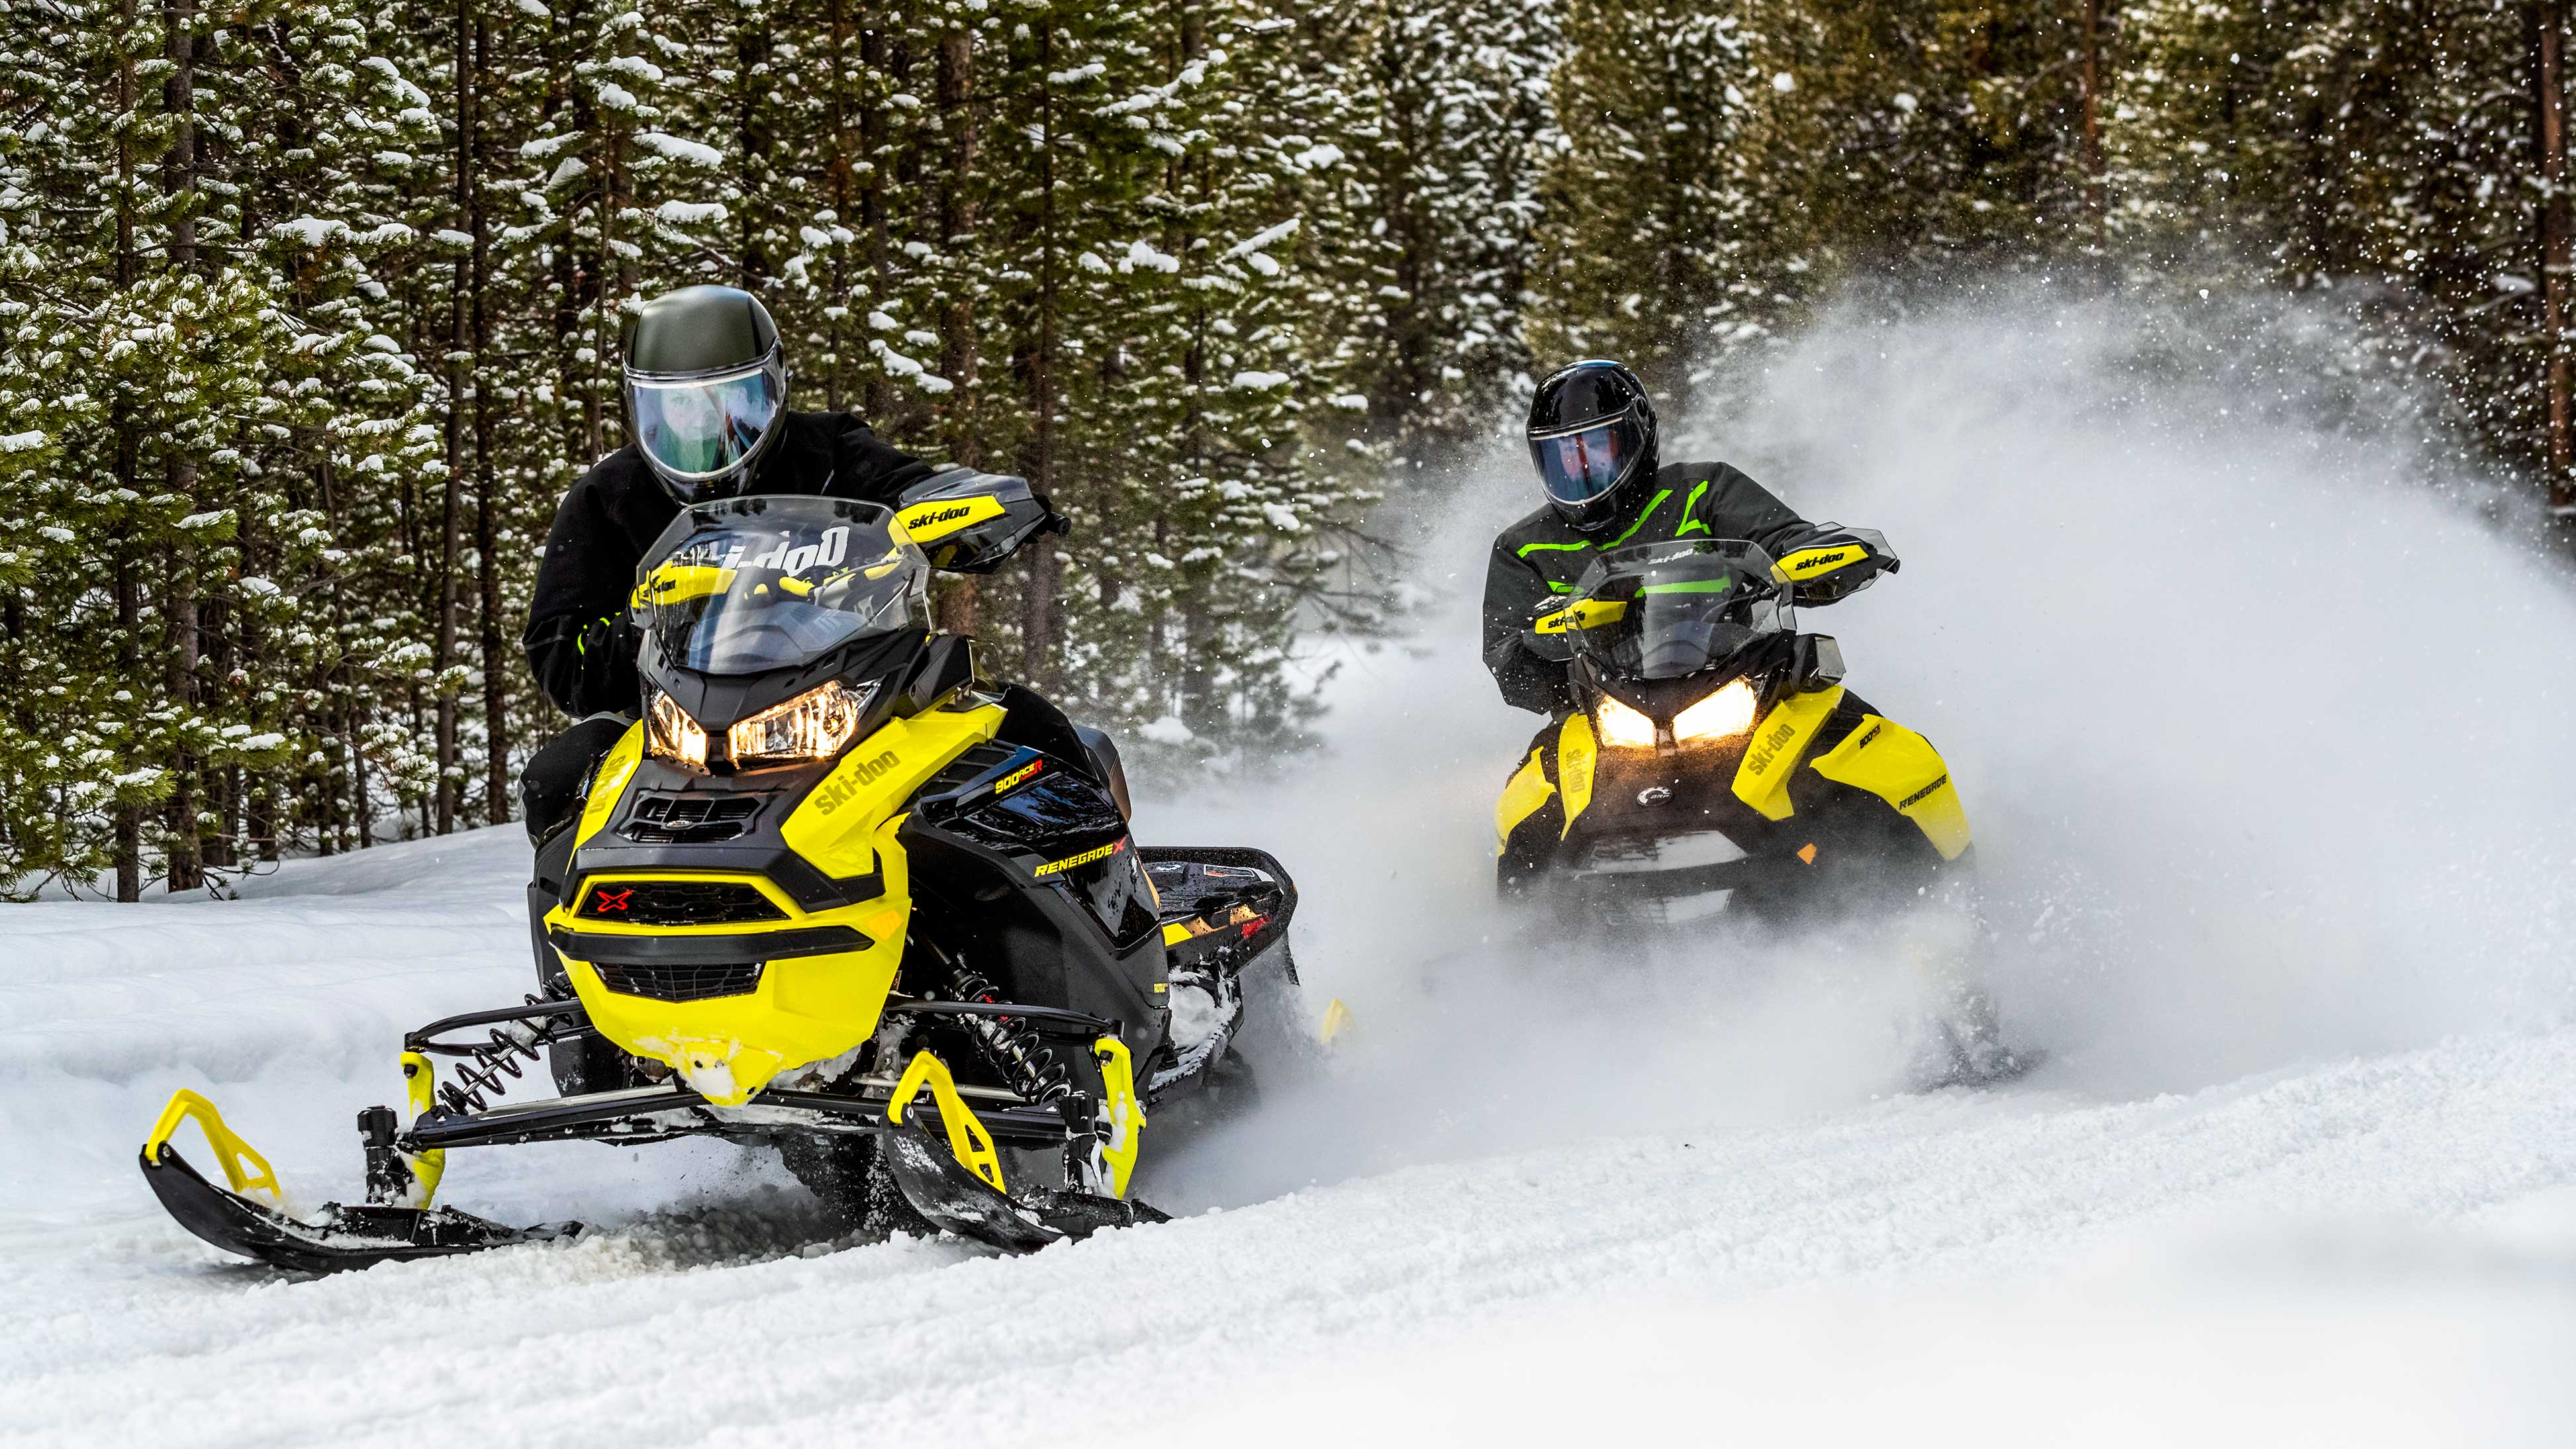 Riders driving their Ski-Doo Renegade in a trail